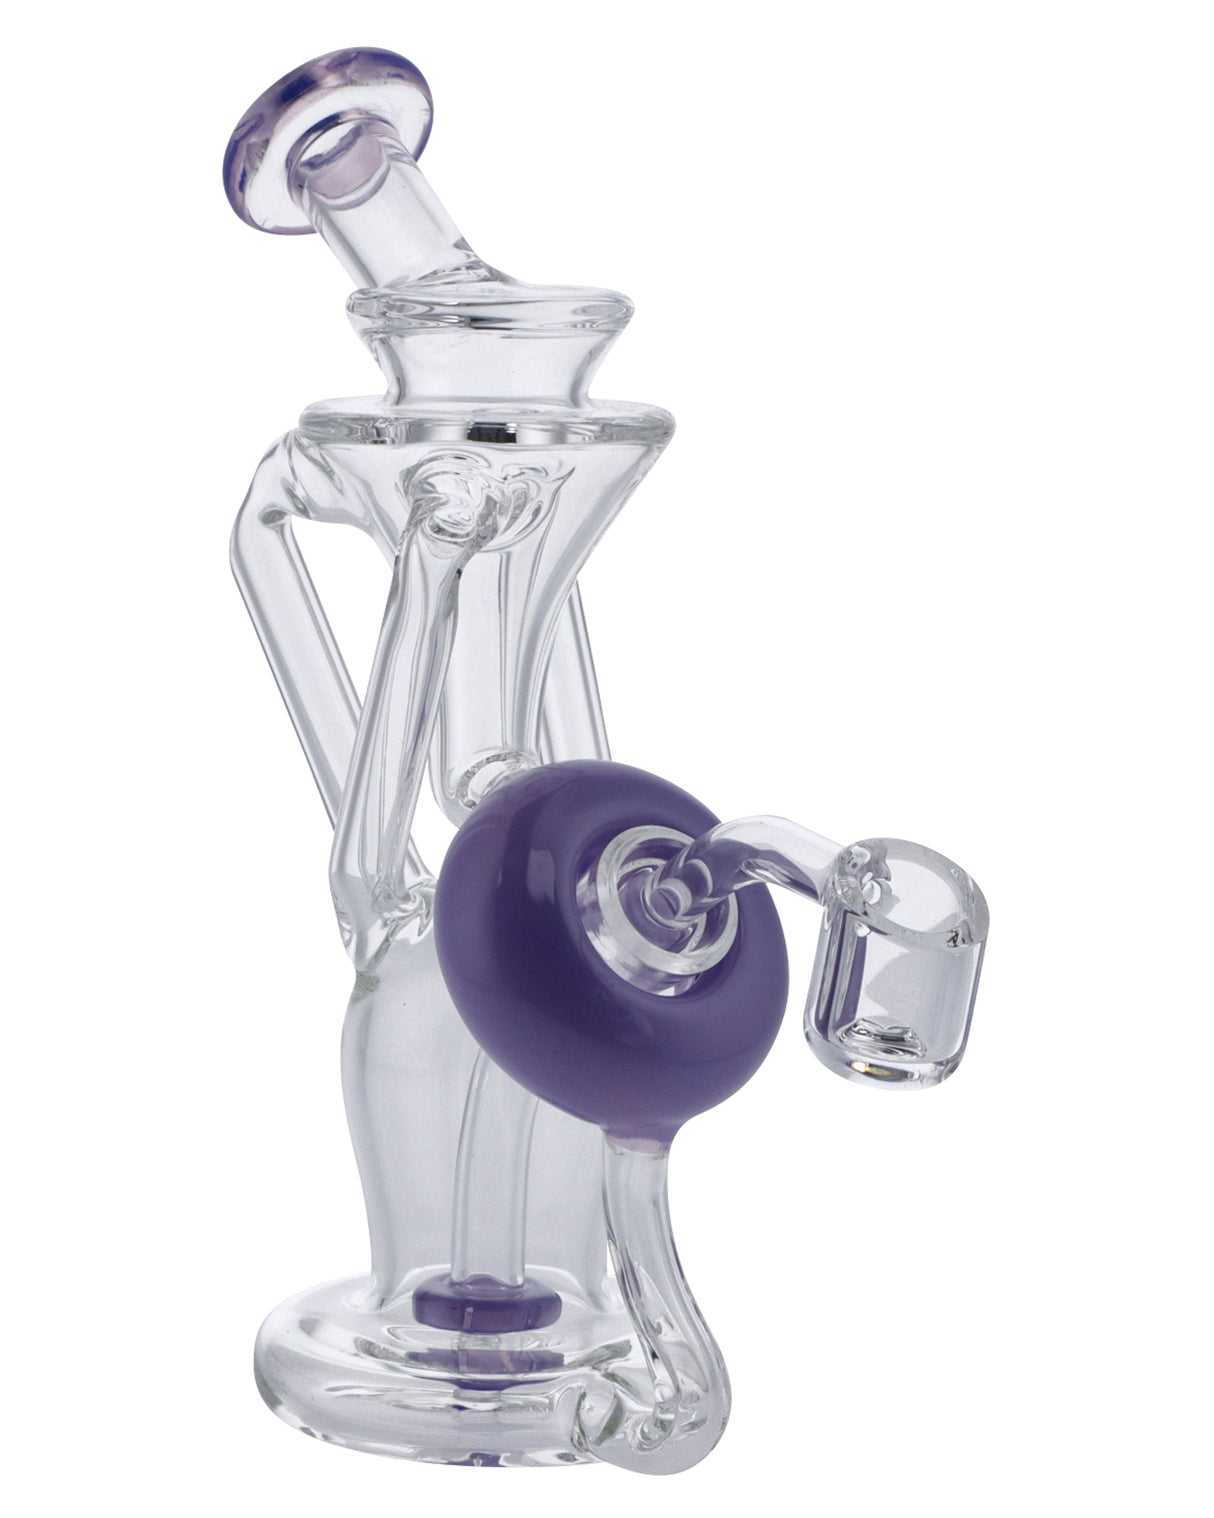 Milky Purple Recycler Dab Rig by DankGeek, compact 6-inch height, 45-degree joint, side view on white